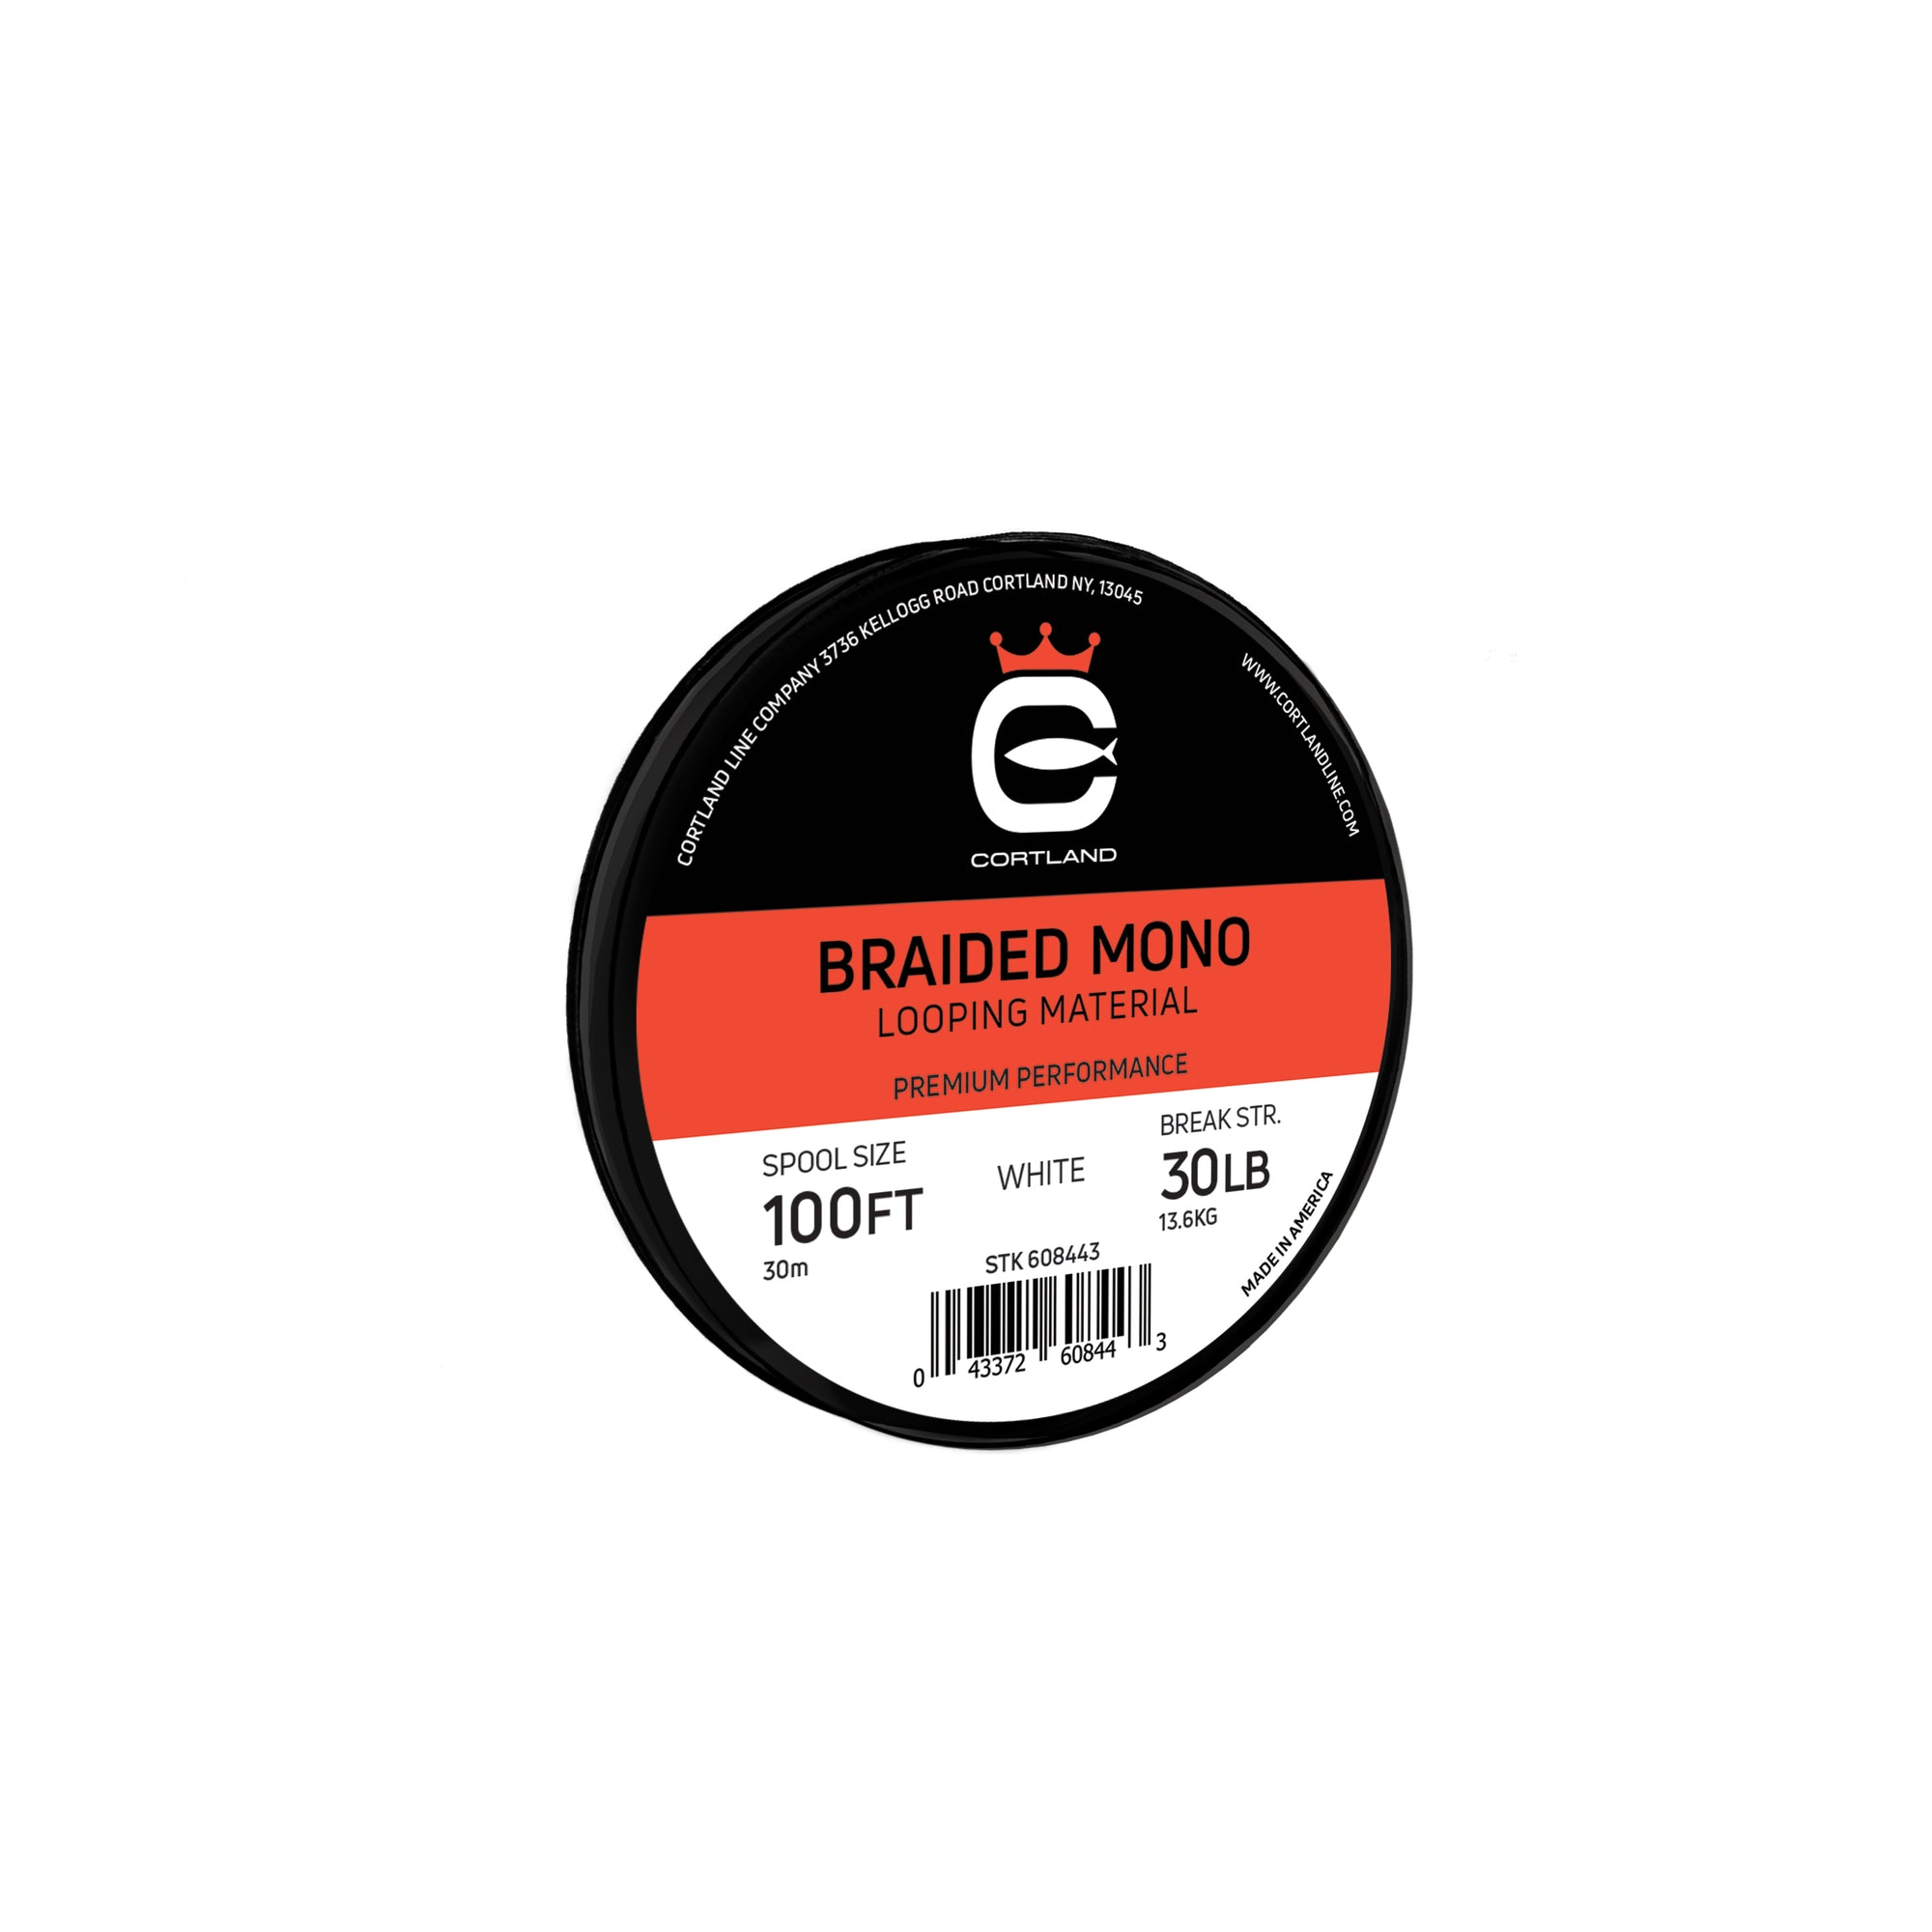 Braided Mono Looping Material